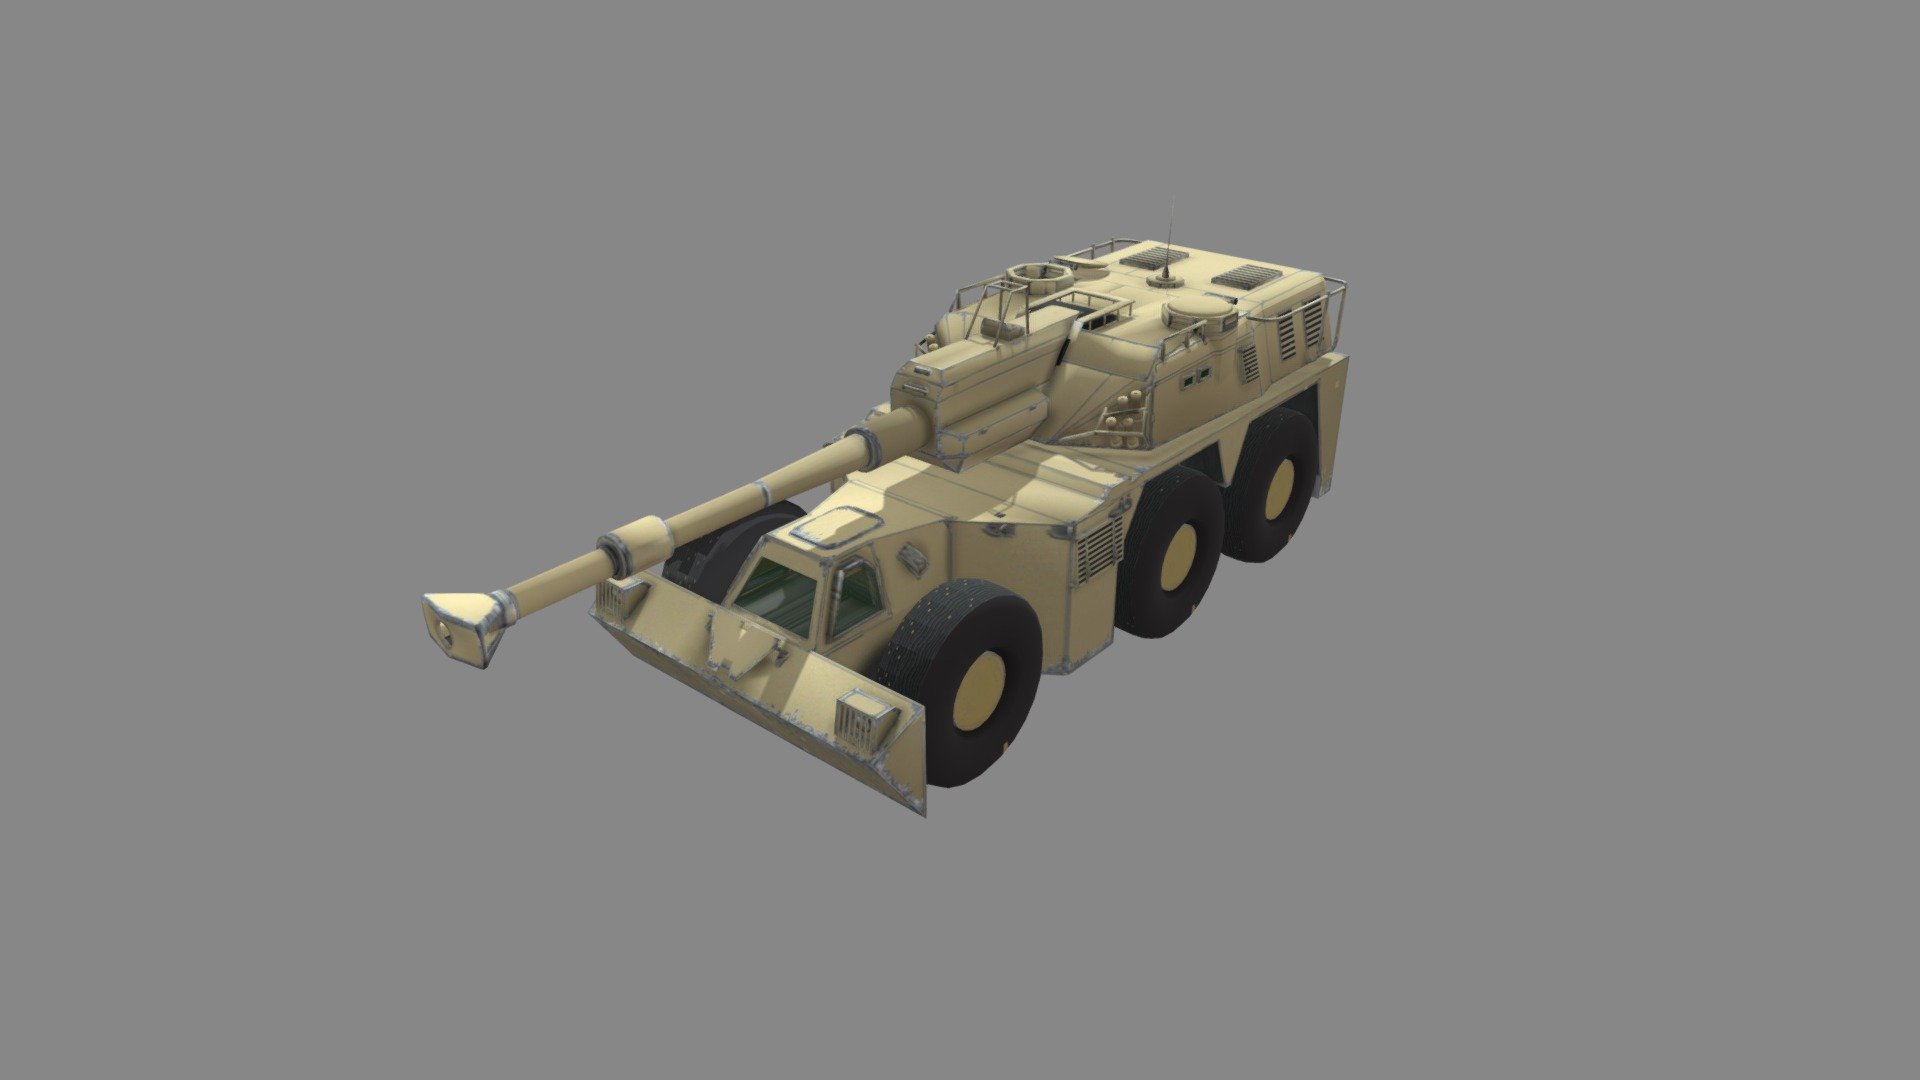 The G6 self propelled howitzer was developed around the ordnance of the G5 howitzer. It is one of the most powerful self-propelled equipment on a wheeled chassis. In addition to the logistical mobility afforded by a wheeled chassis, the G6 is protected against counter battery fire and is able to defend itself in an unsecured area. The chassis is mine protected. The G6 is produced by the LIW division of DENEL Corporation in South Africa. It entered production in 1987 3d model